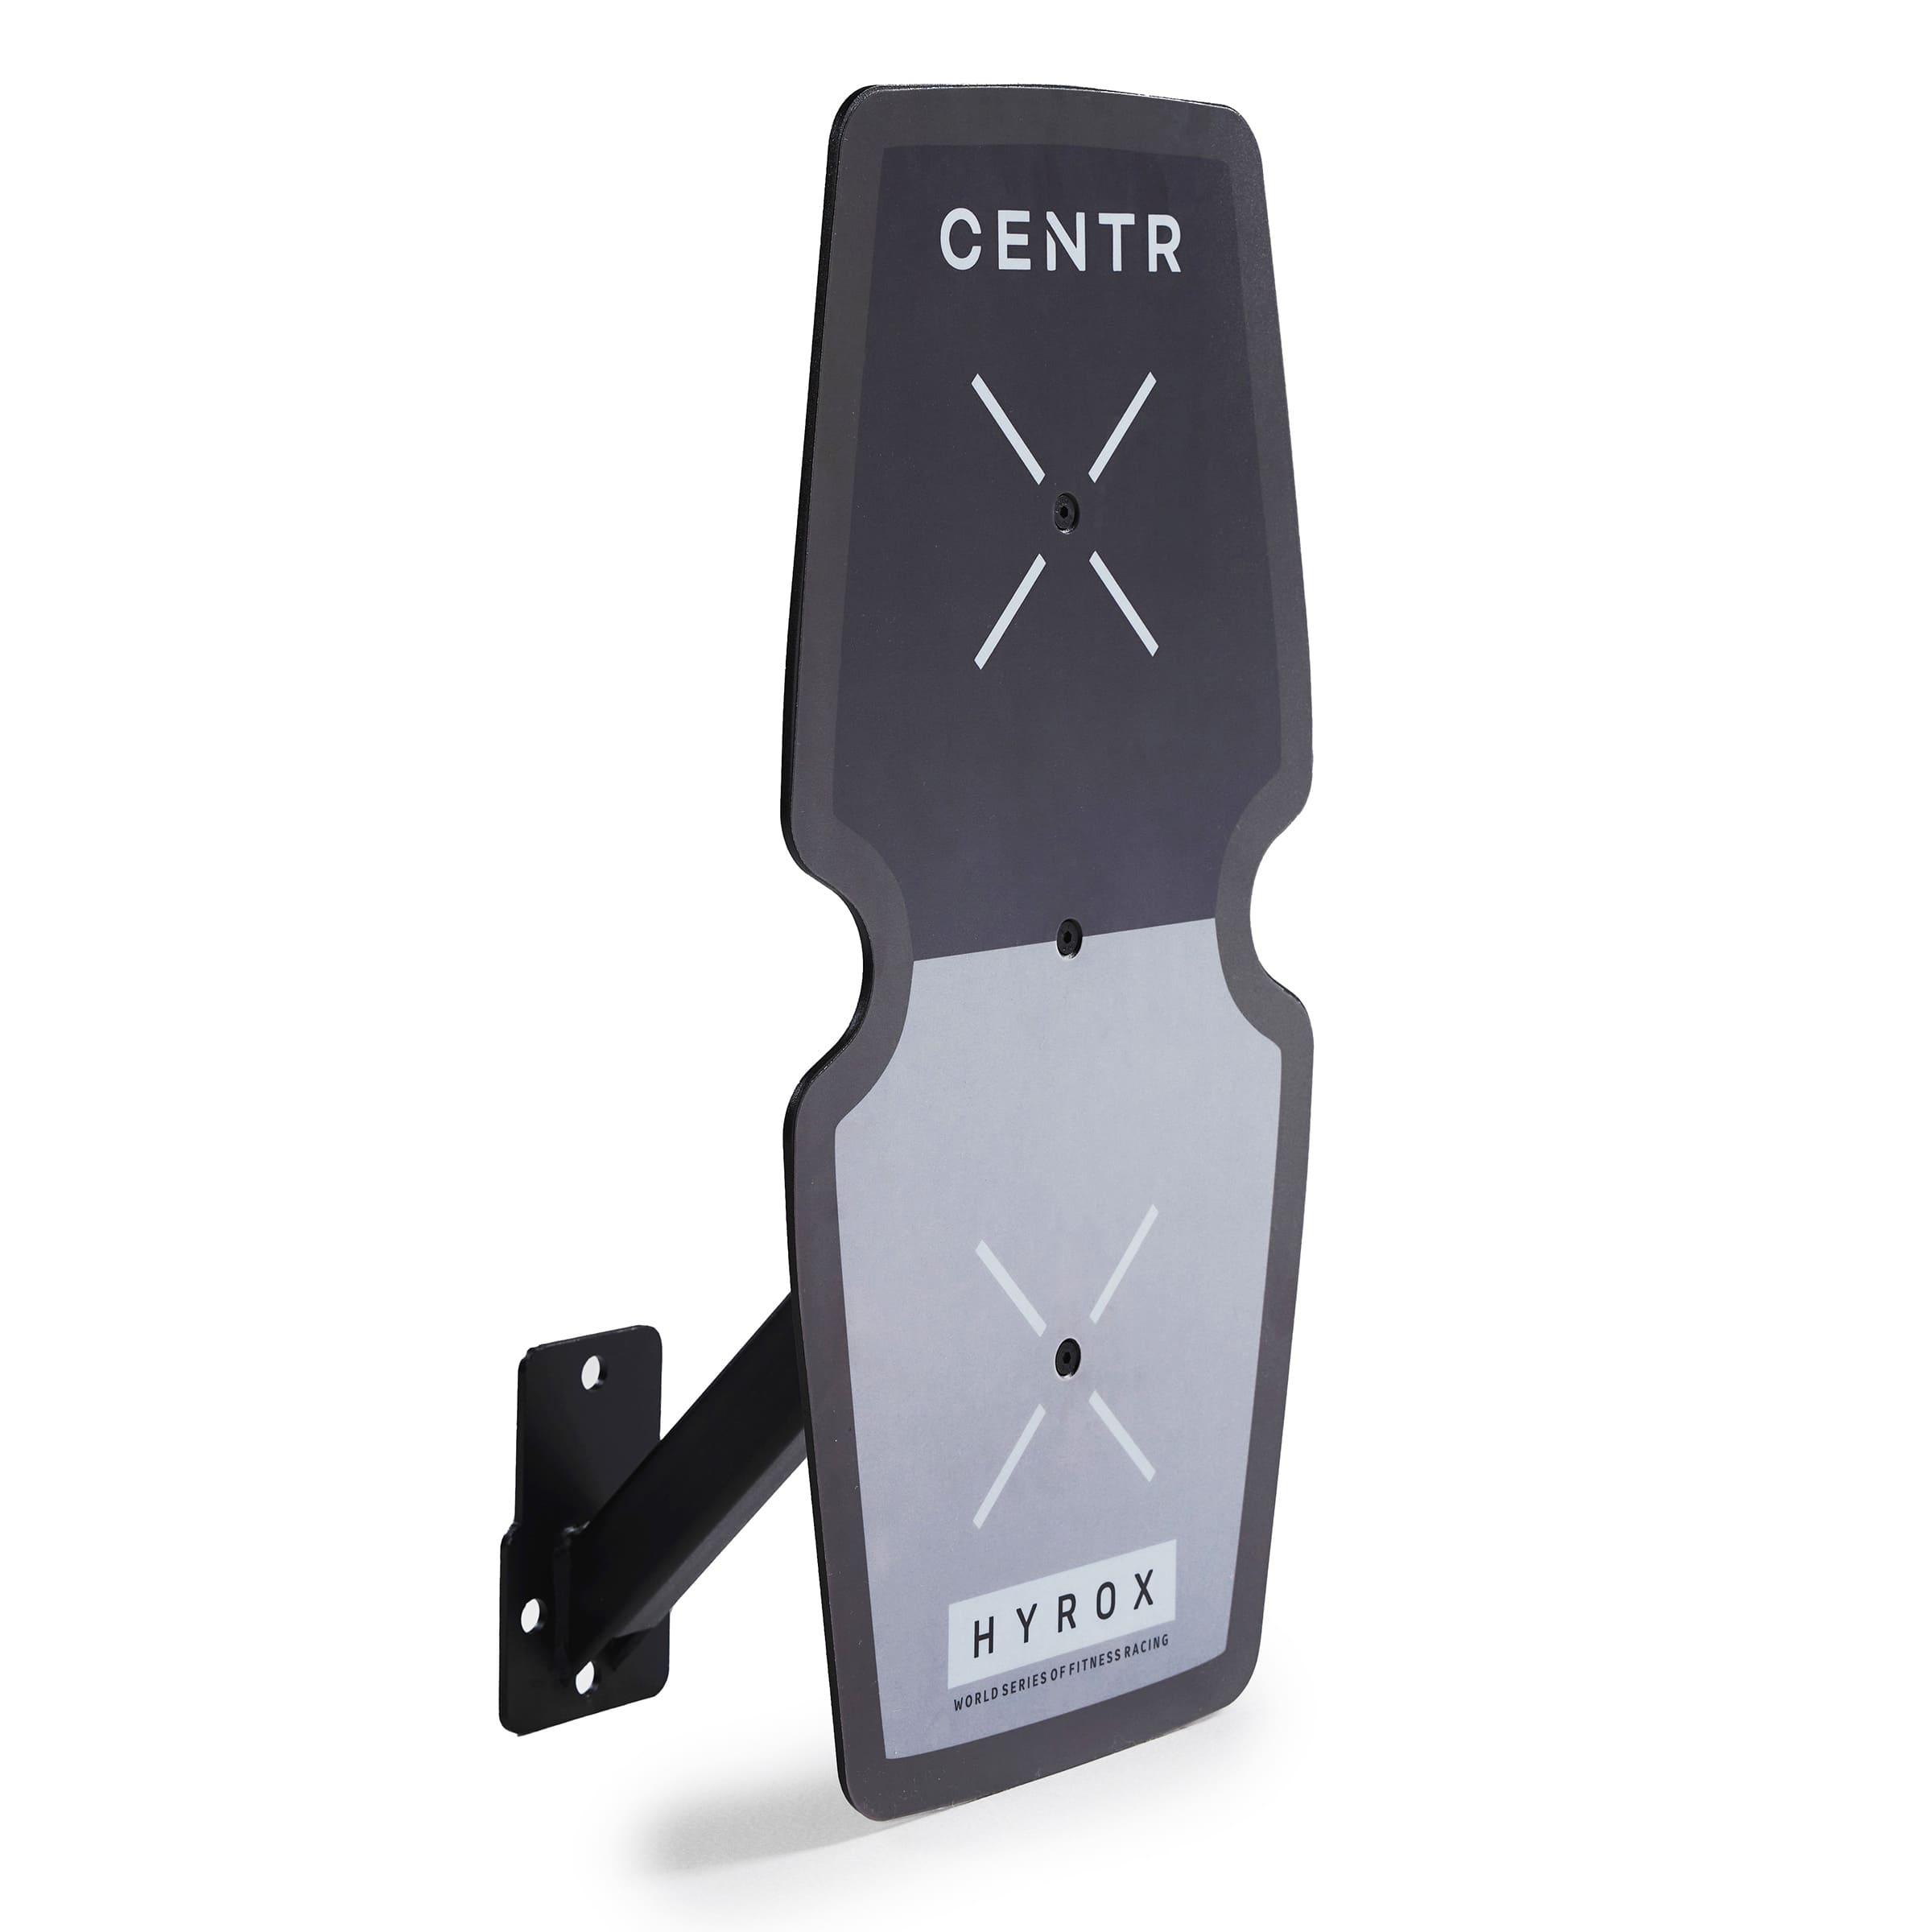 CENTR x HYROX Competition Rig Target (SHIPPING EARLY MAY)